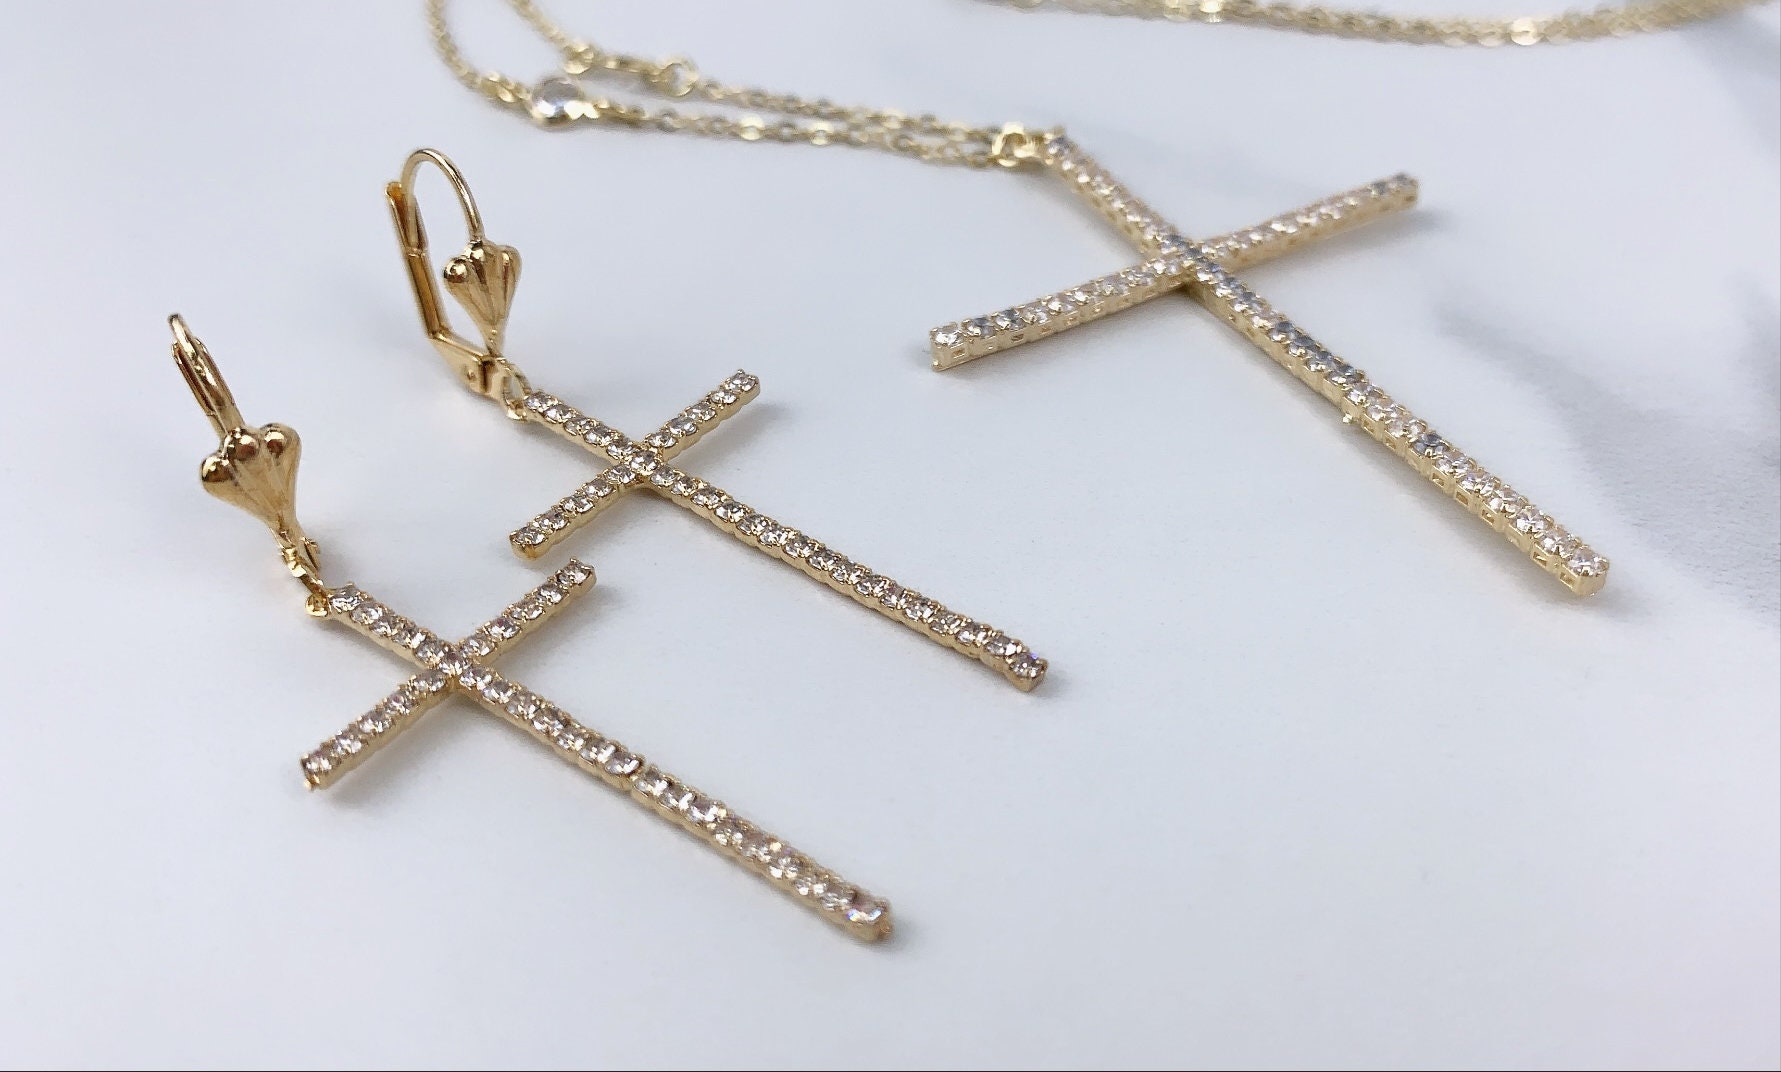 18k Gold Filled Paperclip Chain with Clear Cubic Zirconia Cross Shape Necklace or Earrings, Jewelry Sets, Wholesale Jewelry Making Supplies